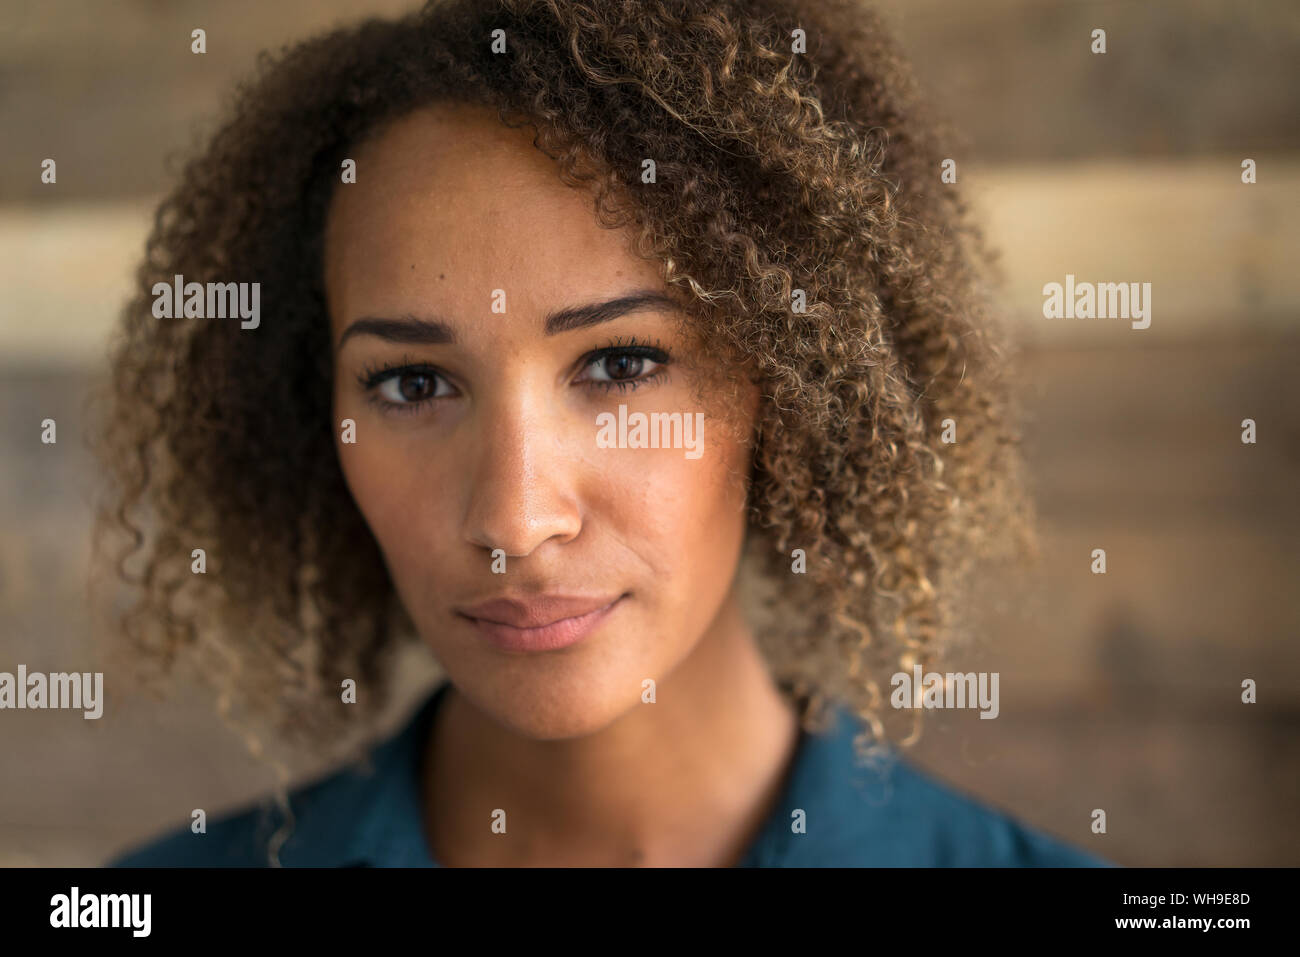 Portrait of young woman with ringlets Stock Photo